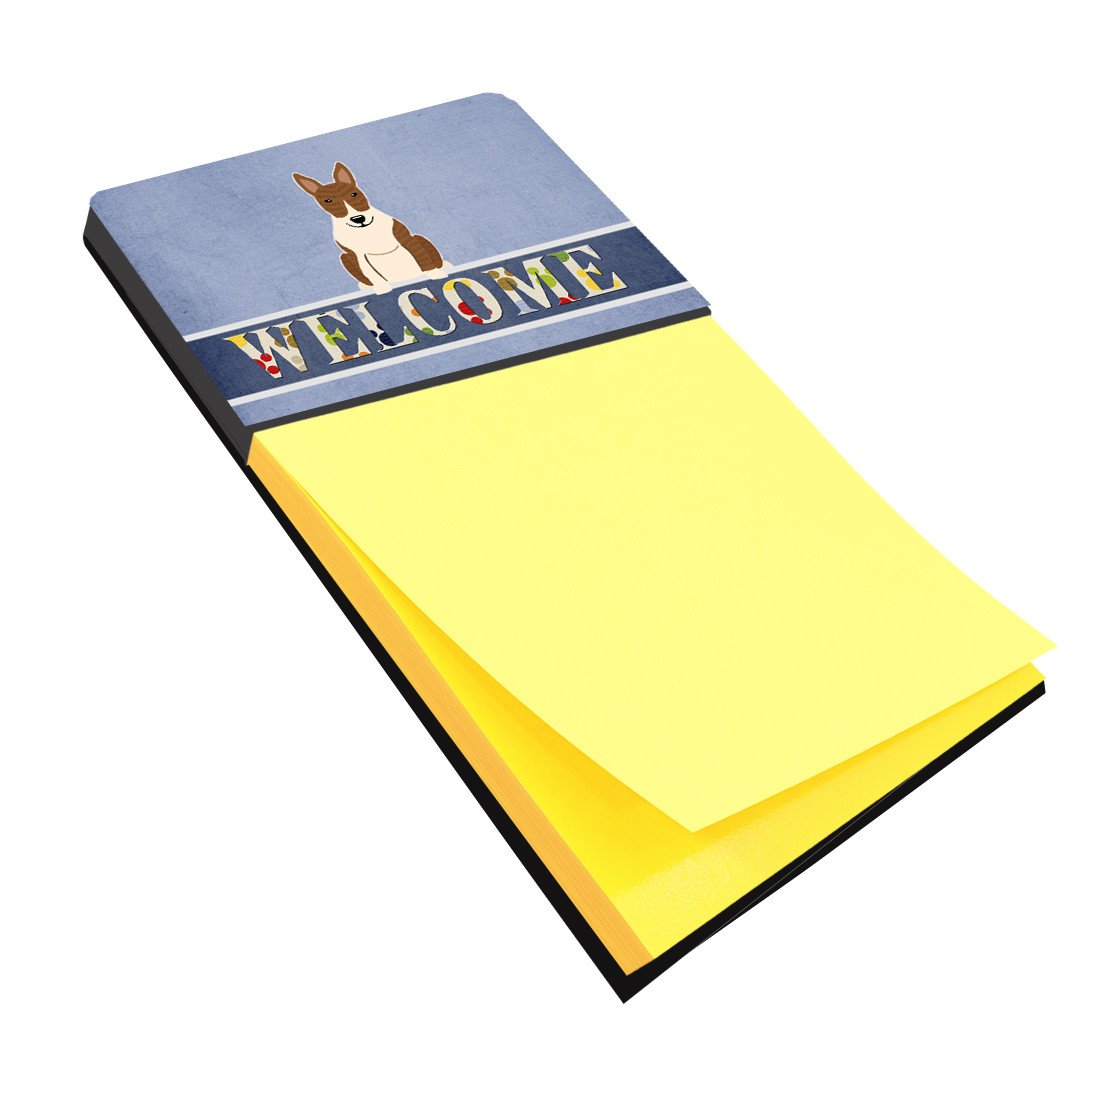 Bull Terrier Brindle Welcome Sticky Note Holder BB5718SN by Caroline's Treasures